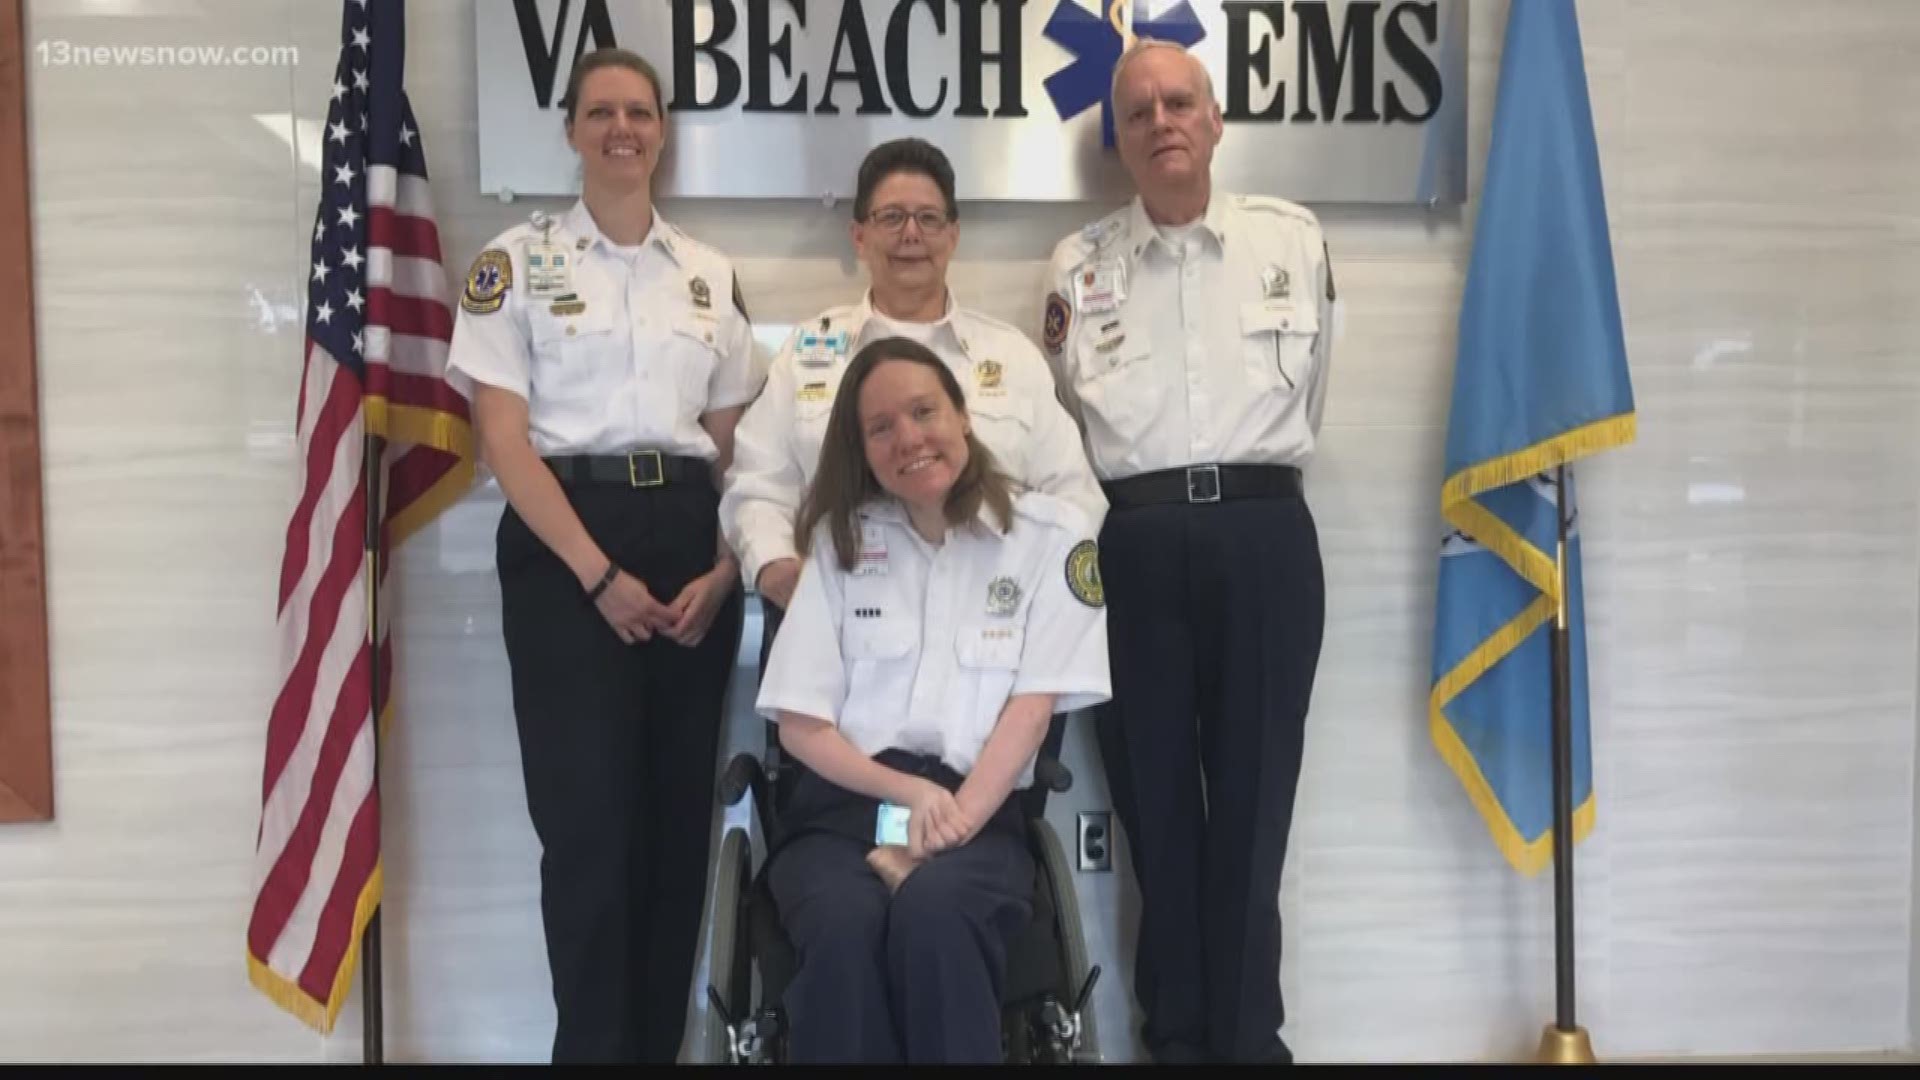 Kathy Budy, her husband Joe and her youngest daughter, Jennifer, volunteer with the Support Services Team. Christi, the oldest daughter is employed with Virginia Beach EMS as a Captain.